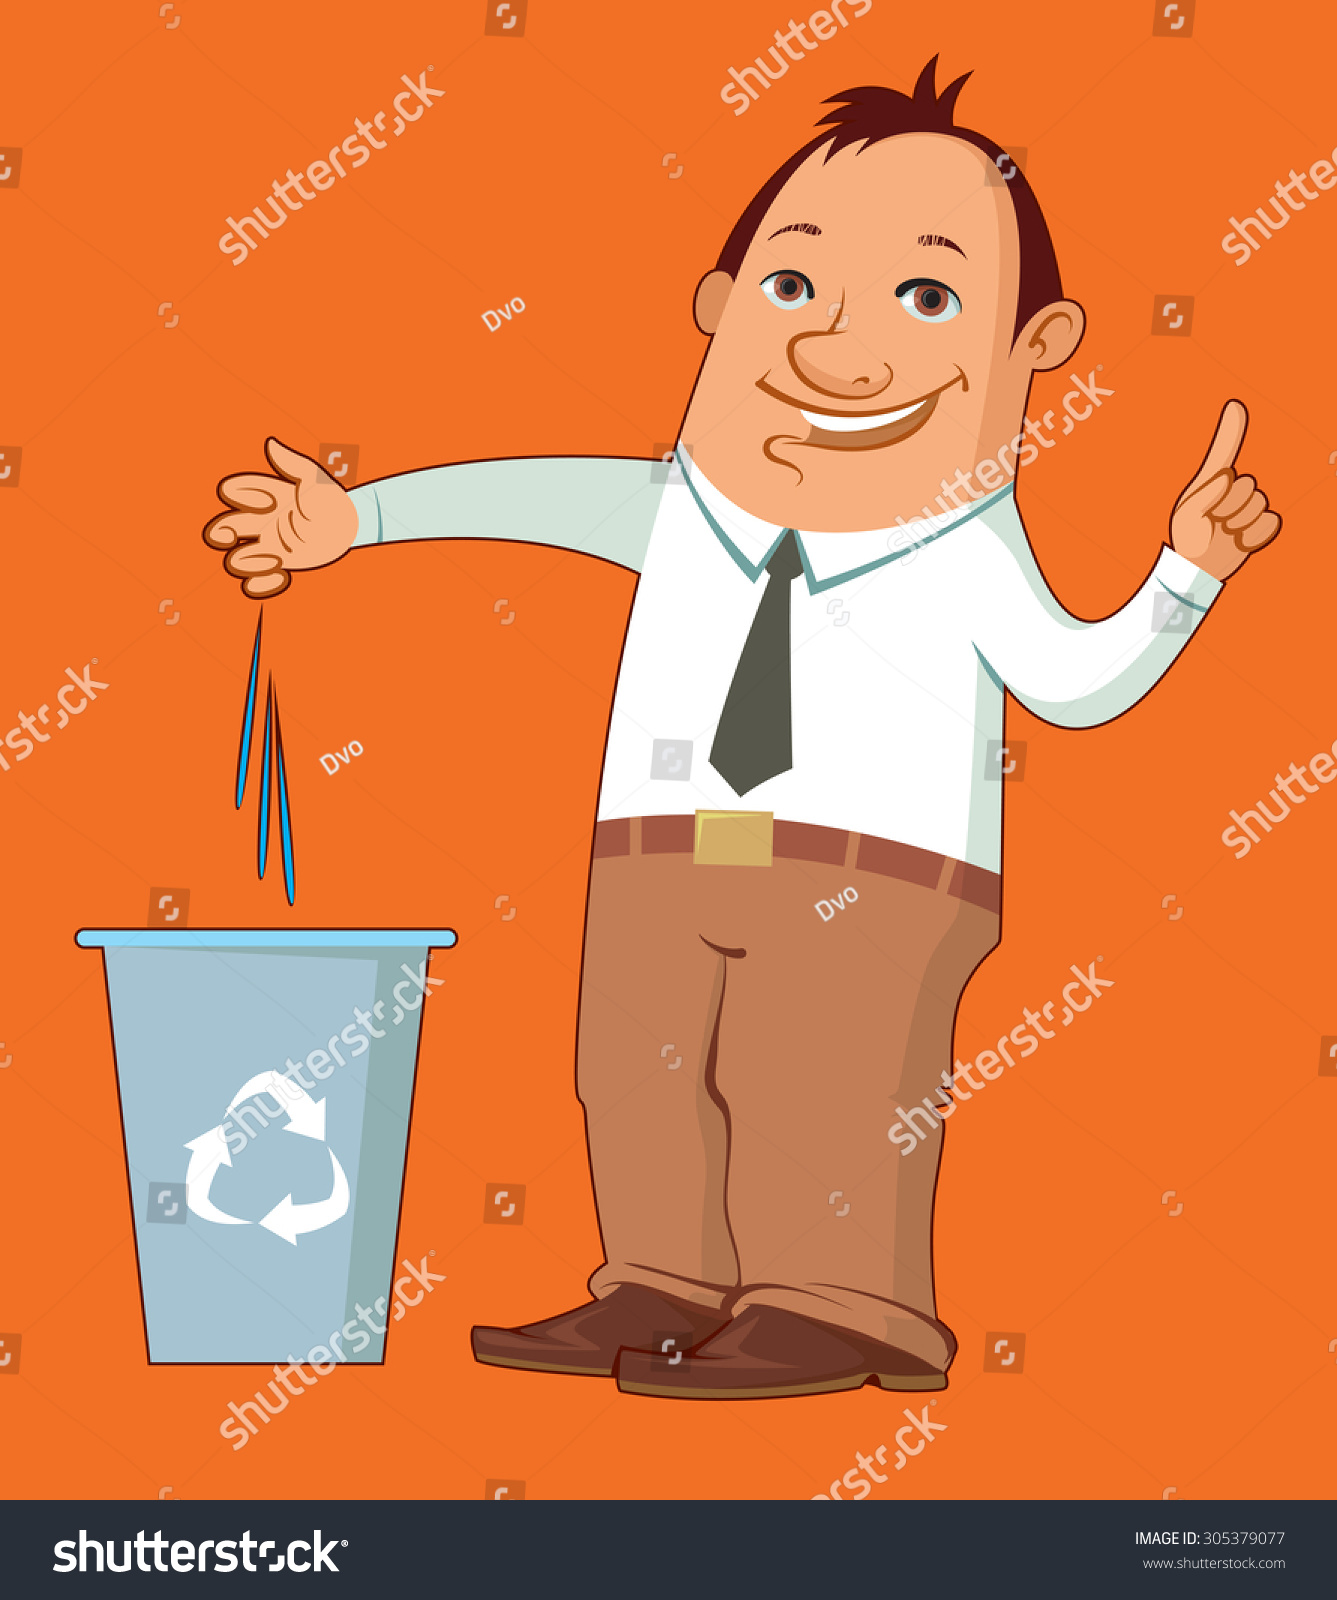 Cartoon Man Taking Out Trash Vector Stock Vector Royalty Free 305379077 Shutterstock 